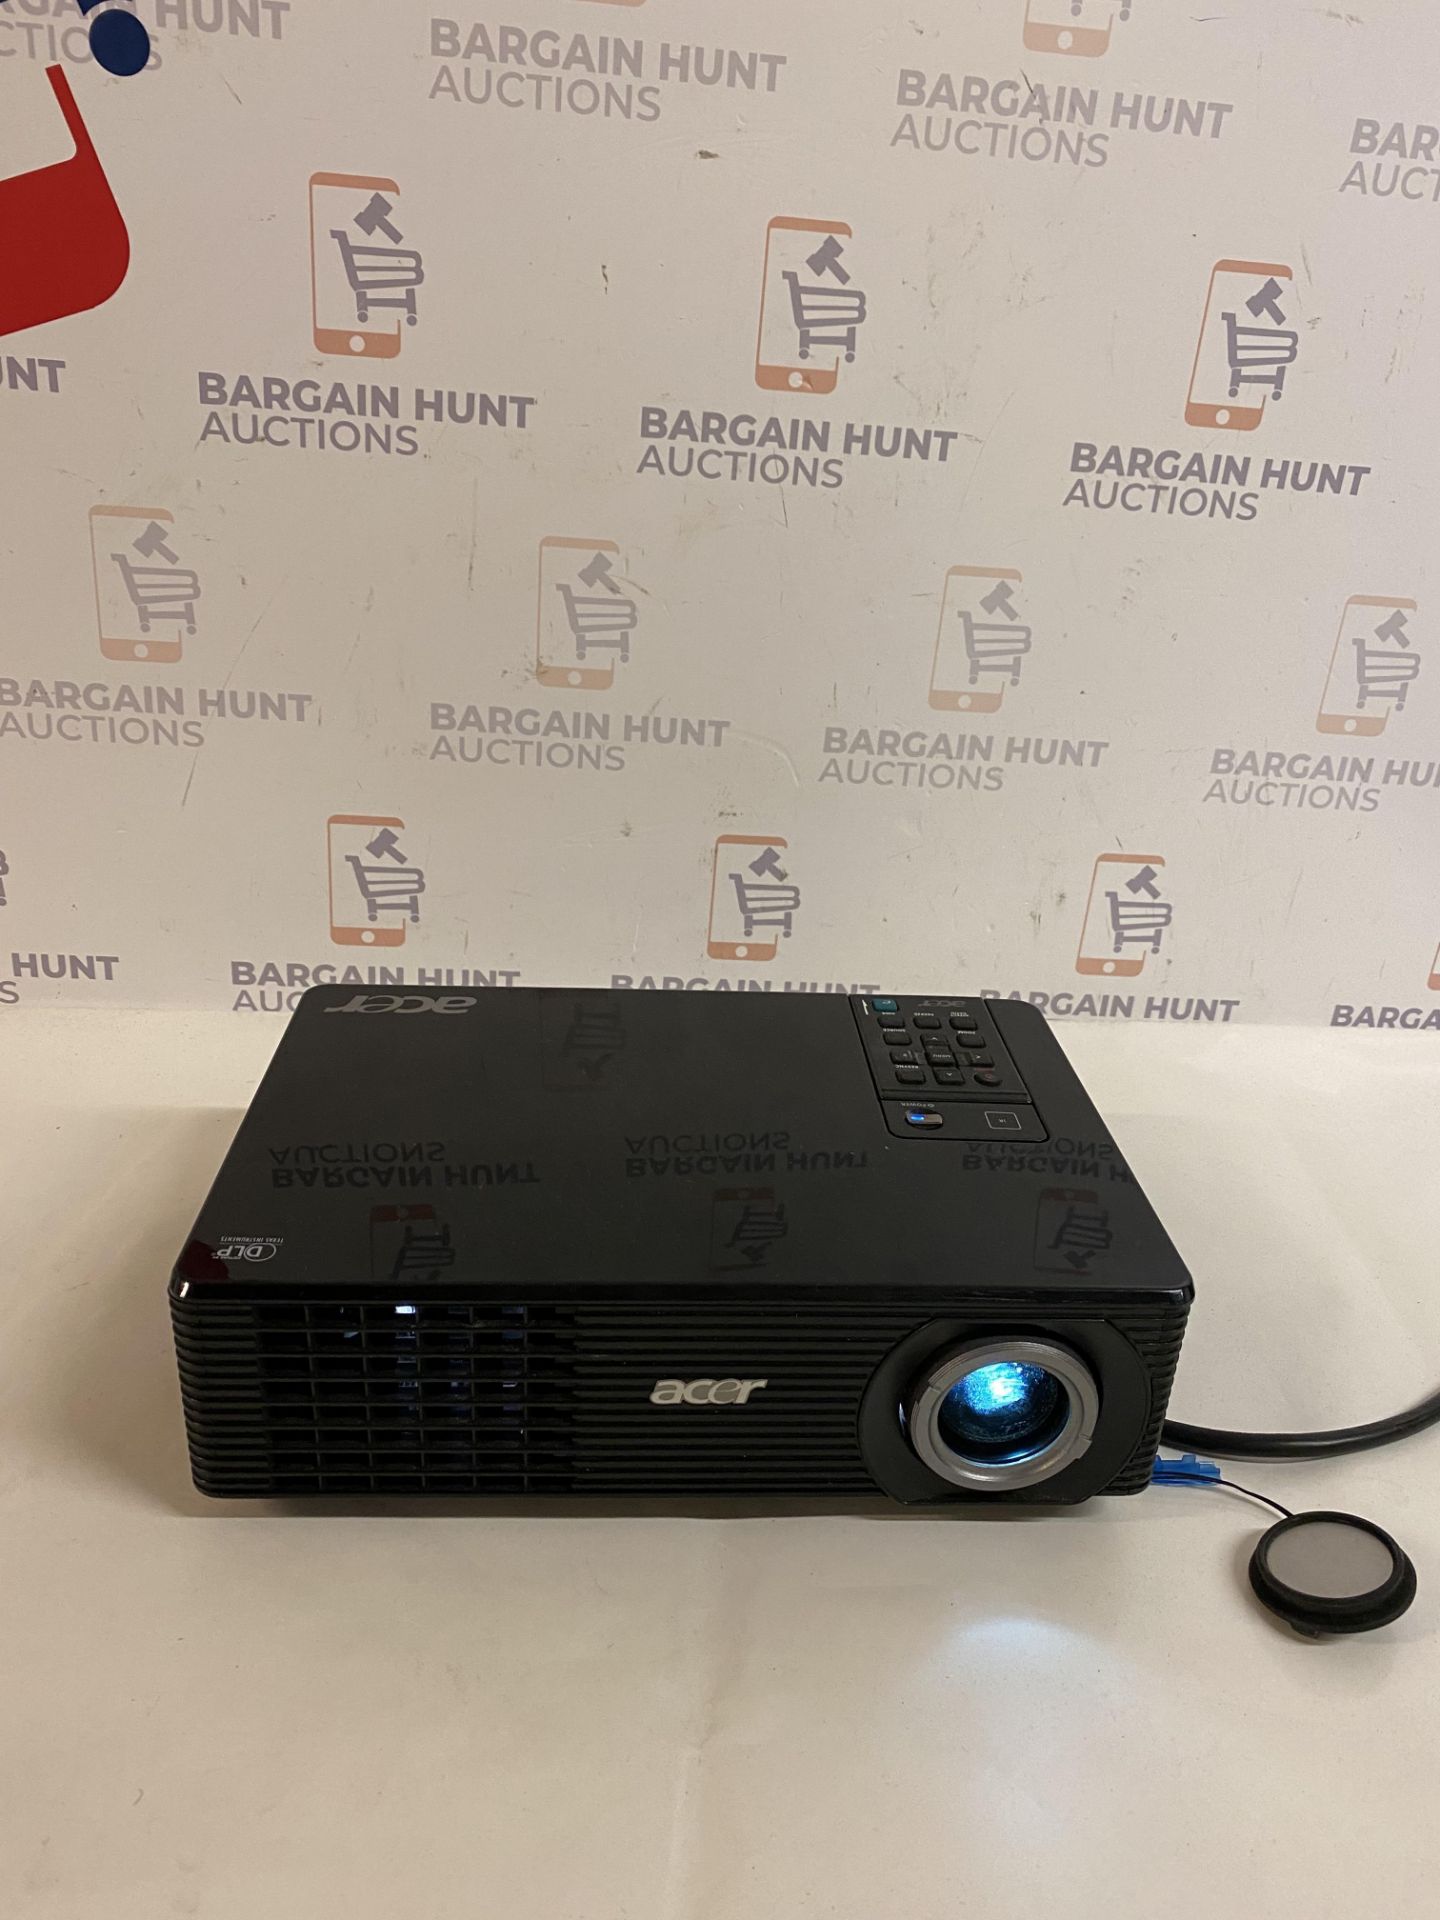 Acer X1160 - DLP Projector (remote control not working, may need new battery)